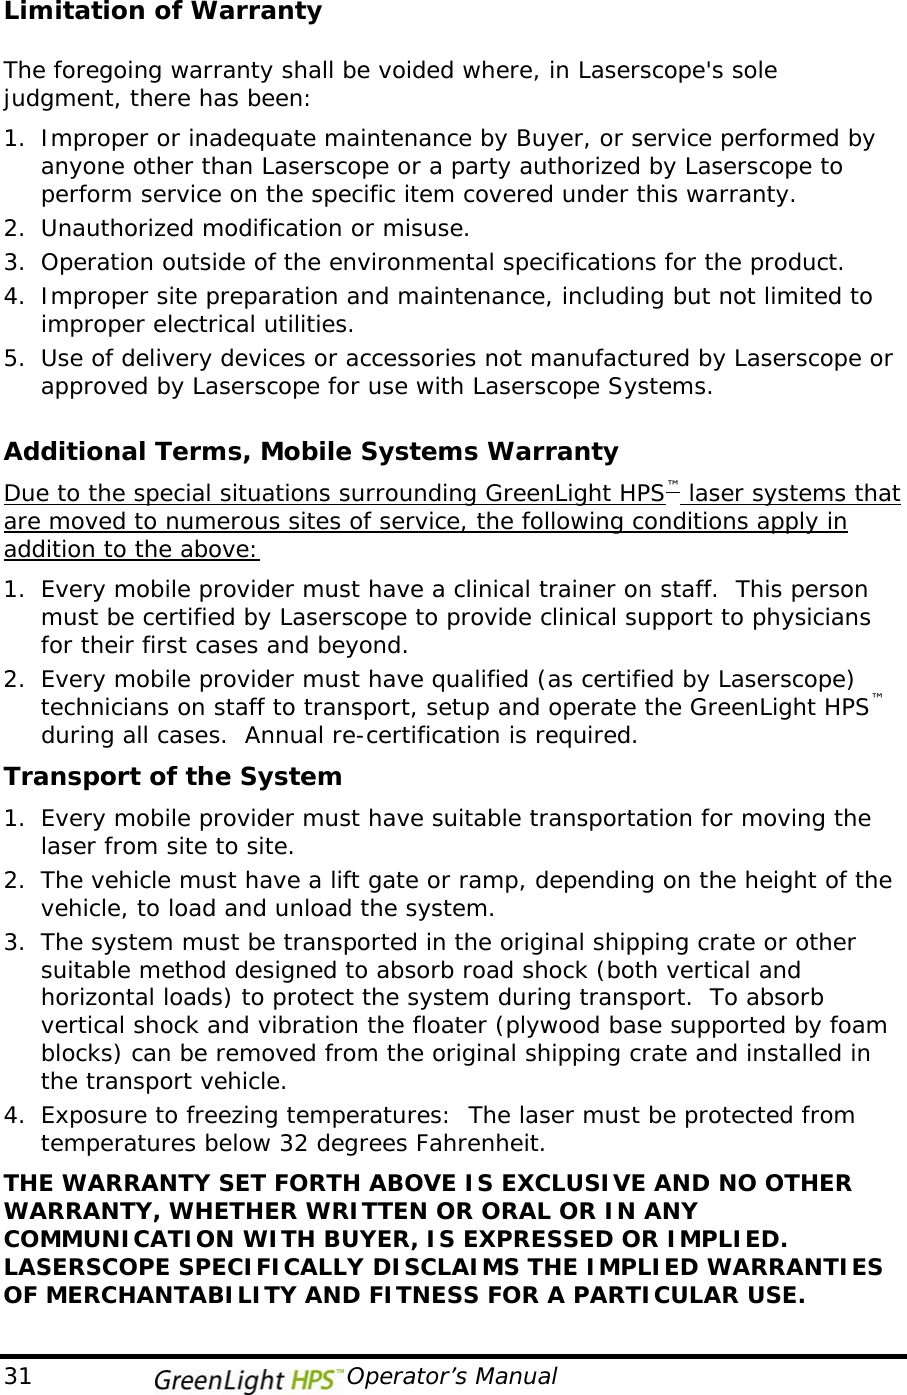   Limitation of Warranty  The foregoing warranty shall be voided where, in Laserscope&apos;s sole judgment, there has been: 1. Improper or inadequate maintenance by Buyer, or service performed by anyone other than Laserscope or a party authorized by Laserscope to perform service on the specific item covered under this warranty. 2. Unauthorized modification or misuse. 3. Operation outside of the environmental specifications for the product. 4. Improper site preparation and maintenance, including but not limited to improper electrical utilities. 5. Use of delivery devices or accessories not manufactured by Laserscope or approved by Laserscope for use with Laserscope Systems.  Additional Terms, Mobile Systems Warranty Due to the special situations surrounding GreenLight HPS™ laser systems that are moved to numerous sites of service, the following conditions apply in addition to the above: 1. Every mobile provider must have a clinical trainer on staff.  This person must be certified by Laserscope to provide clinical support to physicians for their first cases and beyond. 2. Every mobile provider must have qualified (as certified by Laserscope) technicians on staff to transport, setup and operate the GreenLight HPS™ during all cases.  Annual re-certification is required. Transport of the System 1. Every mobile provider must have suitable transportation for moving the laser from site to site.  2. The vehicle must have a lift gate or ramp, depending on the height of the vehicle, to load and unload the system.  3. The system must be transported in the original shipping crate or other suitable method designed to absorb road shock (both vertical and horizontal loads) to protect the system during transport.  To absorb vertical shock and vibration the floater (plywood base supported by foam blocks) can be removed from the original shipping crate and installed in the transport vehicle. 4. Exposure to freezing temperatures:  The laser must be protected from temperatures below 32 degrees Fahrenheit.  THE WARRANTY SET FORTH ABOVE IS EXCLUSIVE AND NO OTHER WARRANTY, WHETHER WRITTEN OR ORAL OR IN ANY COMMUNICATION WITH BUYER, IS EXPRESSED OR IMPLIED.  LASERSCOPE SPECIFICALLY DISCLAIMS THE IMPLIED WARRANTIES OF MERCHANTABILITY AND FITNESS FOR A PARTICULAR USE.  31                                       Operator’s Manual 